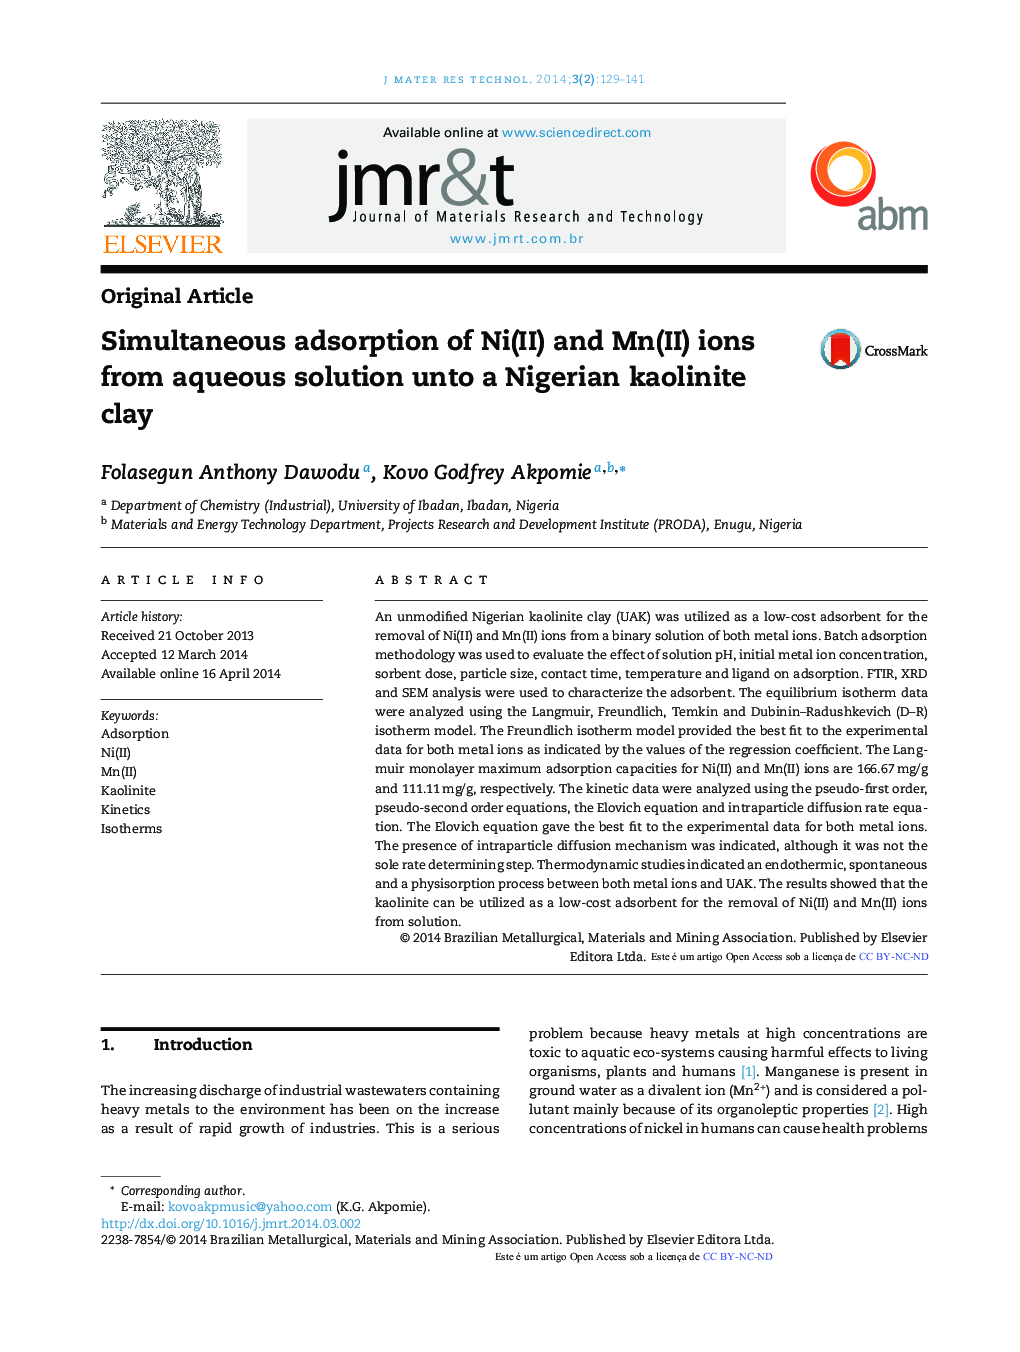 Simultaneous adsorption of Ni(II) and Mn(II) ions from aqueous solution unto a Nigerian kaolinite clay